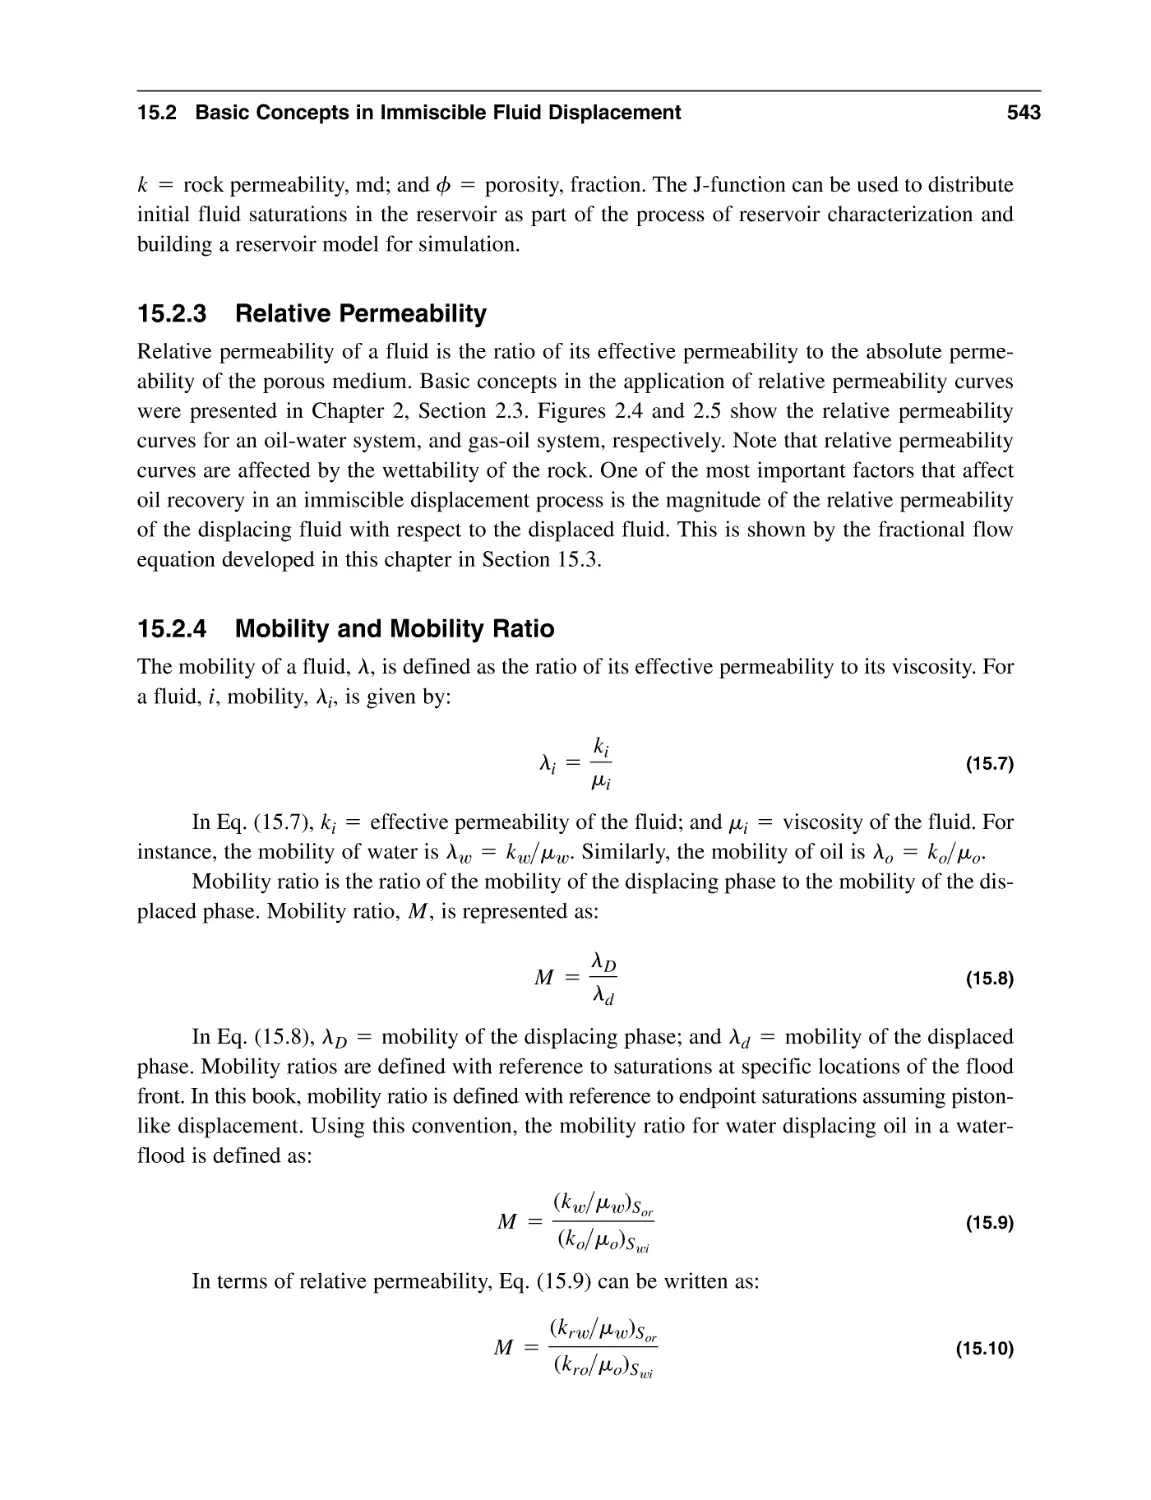 15.2.3 Relative Permeability
15.2.4 Mobility and Mobility Ratio